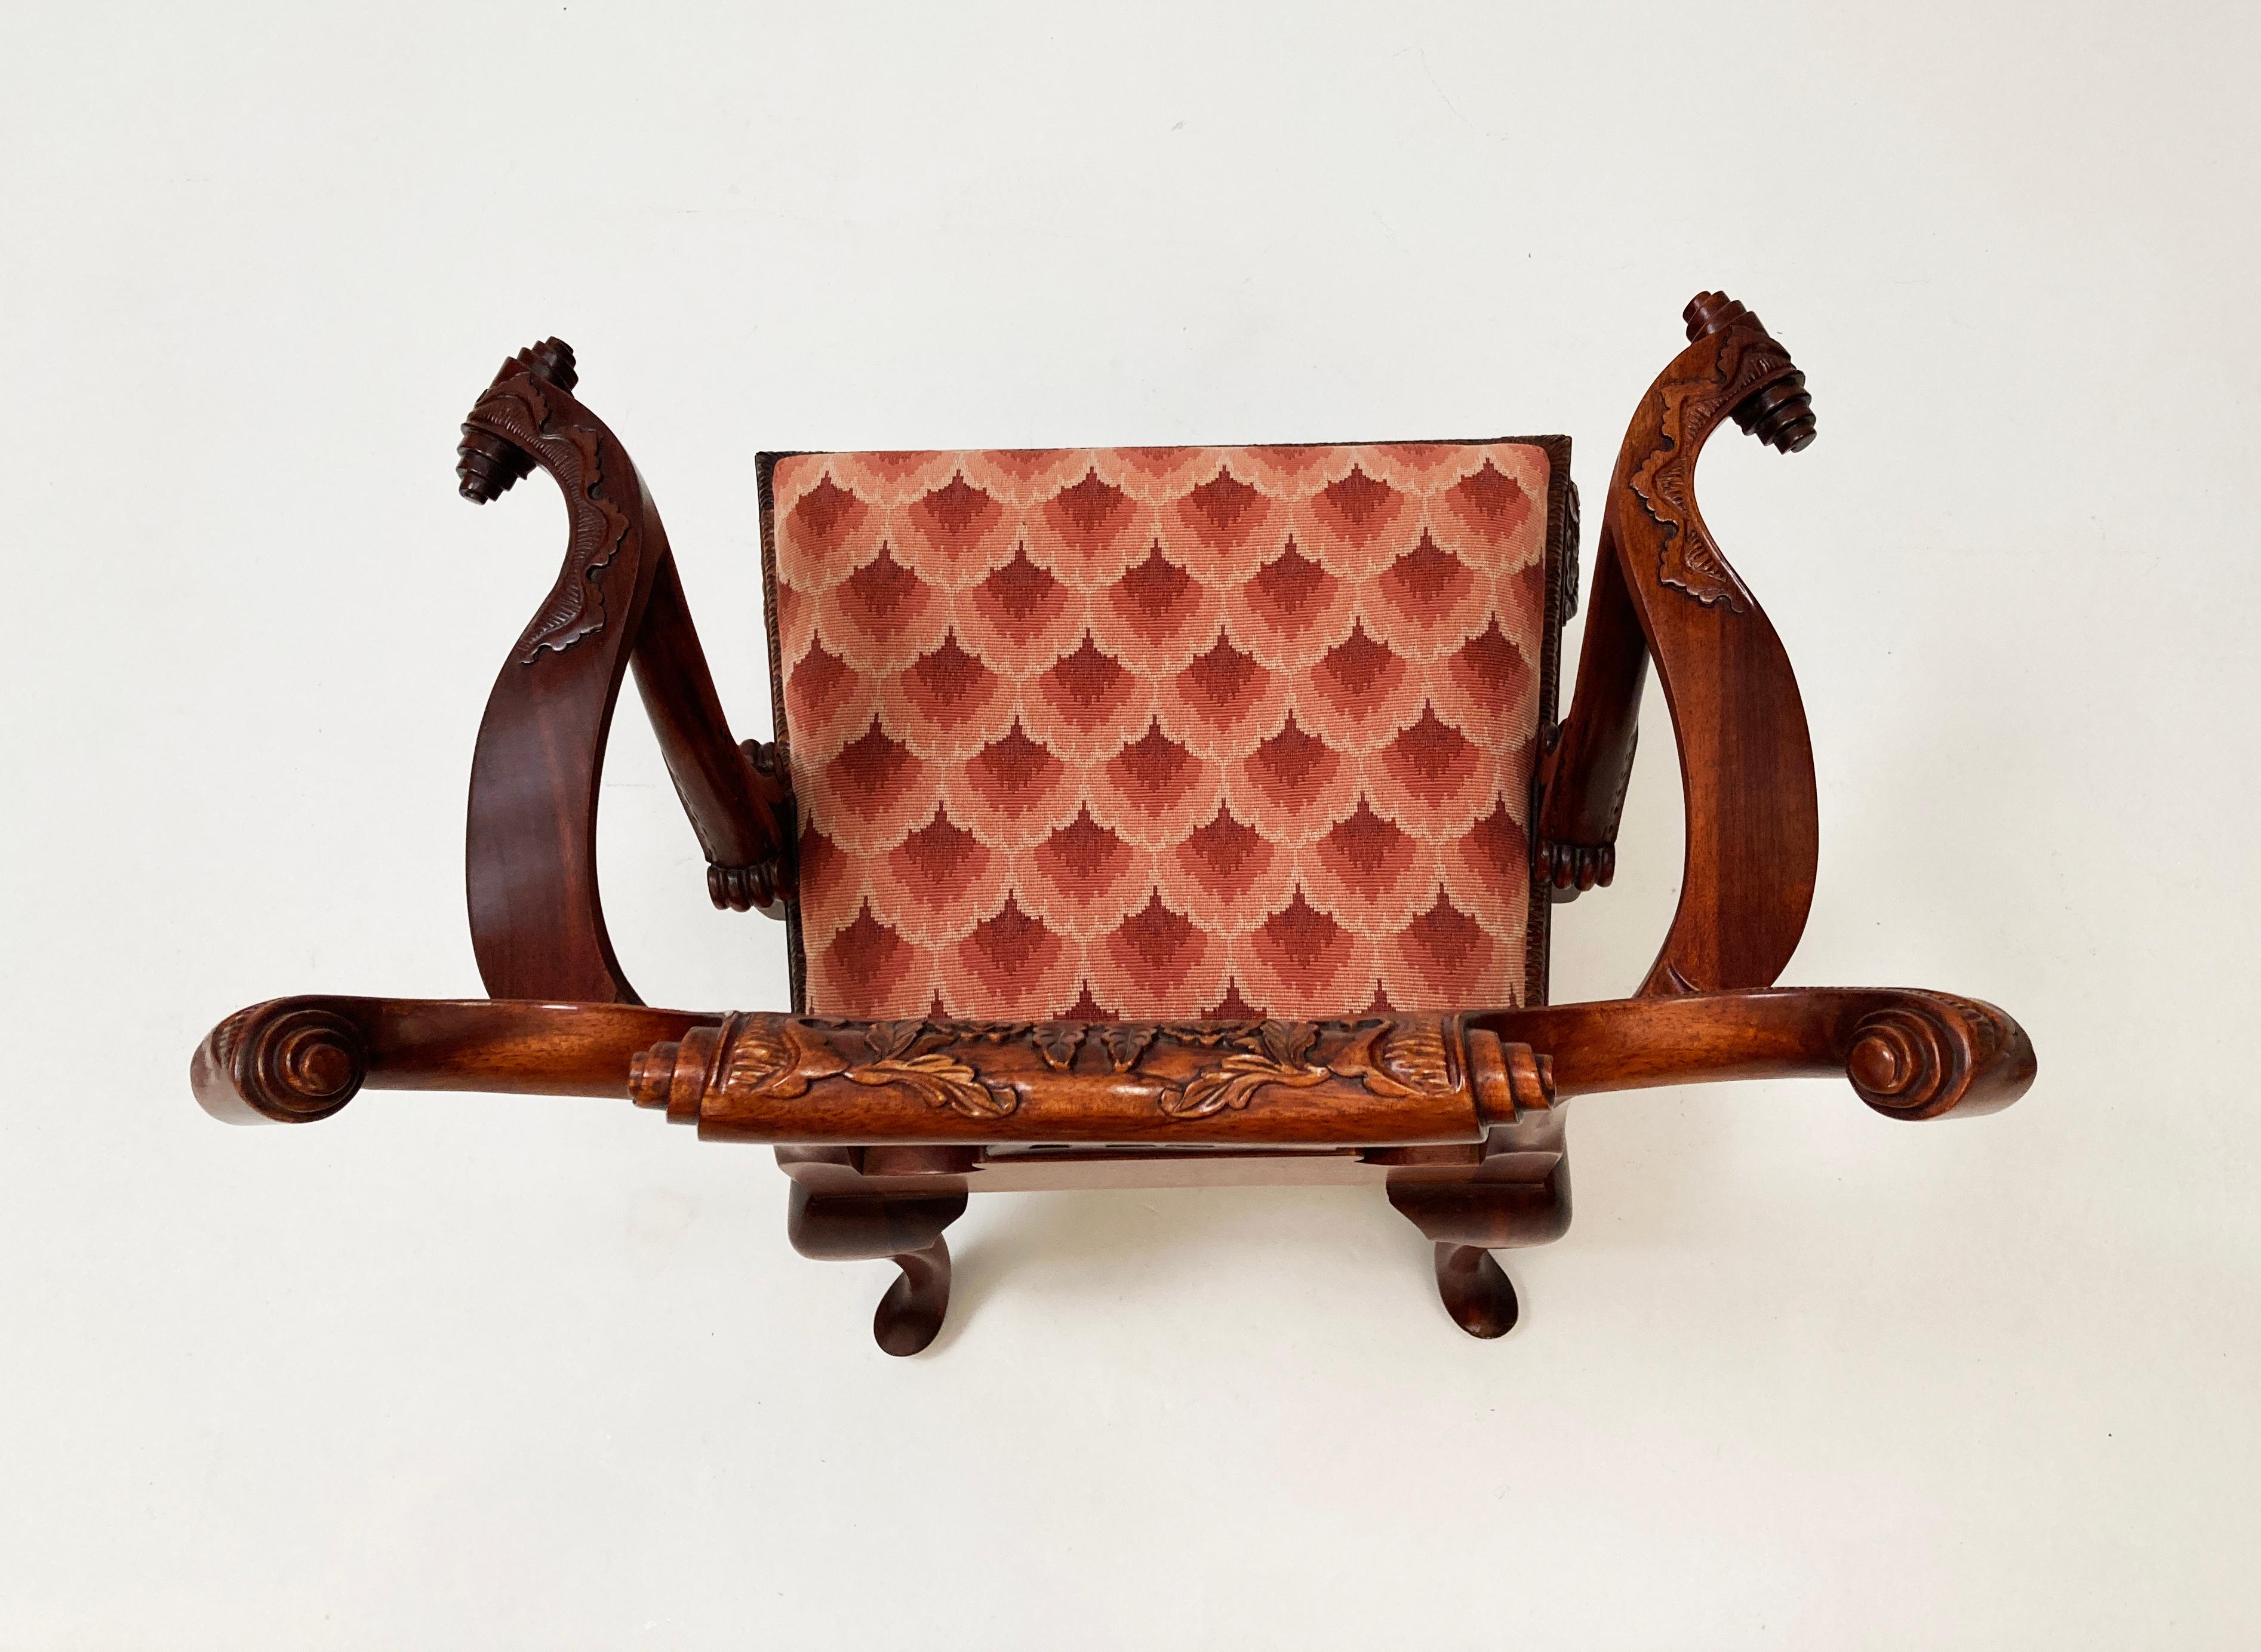 Early 20th Century Mahogany Irish Antique Replica Chippendale Chairs- Set of 2 For Sale 3